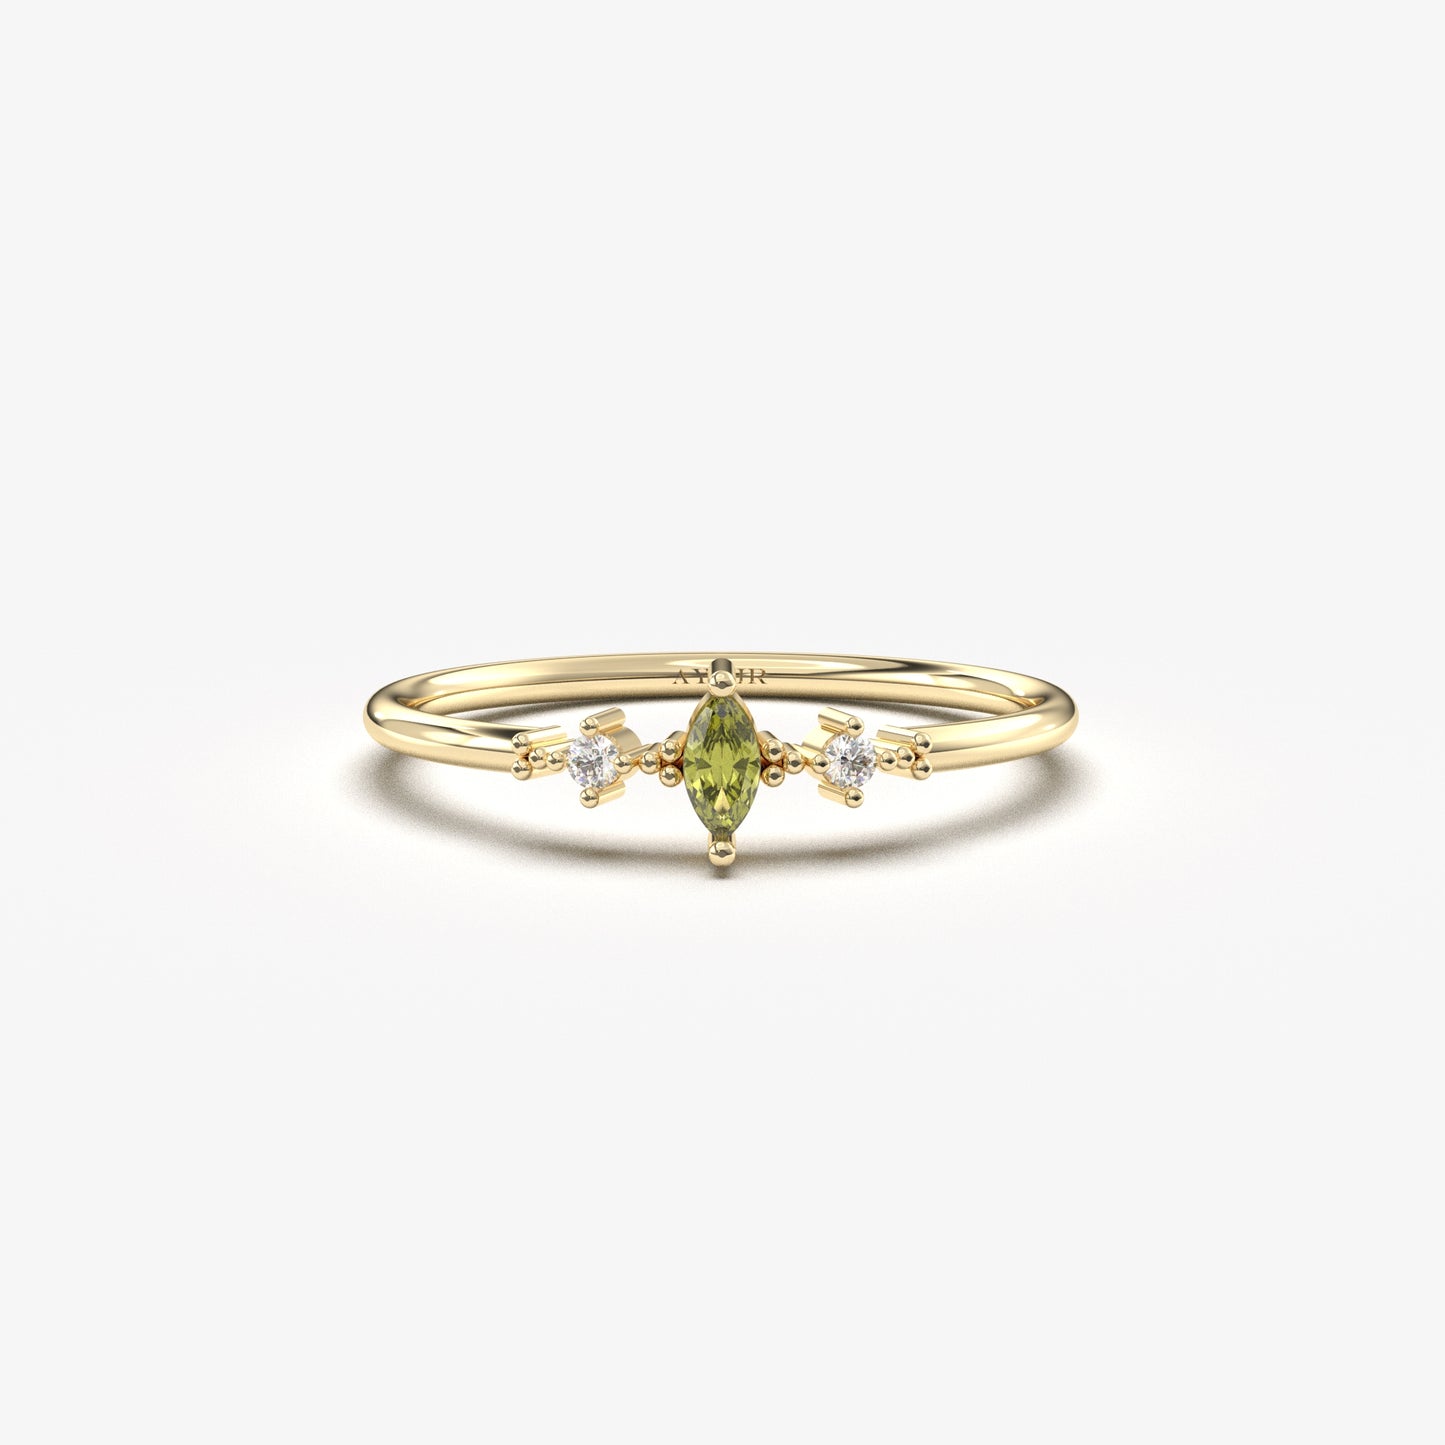 14K Gold Marquise Peridot Ring - 2S111P